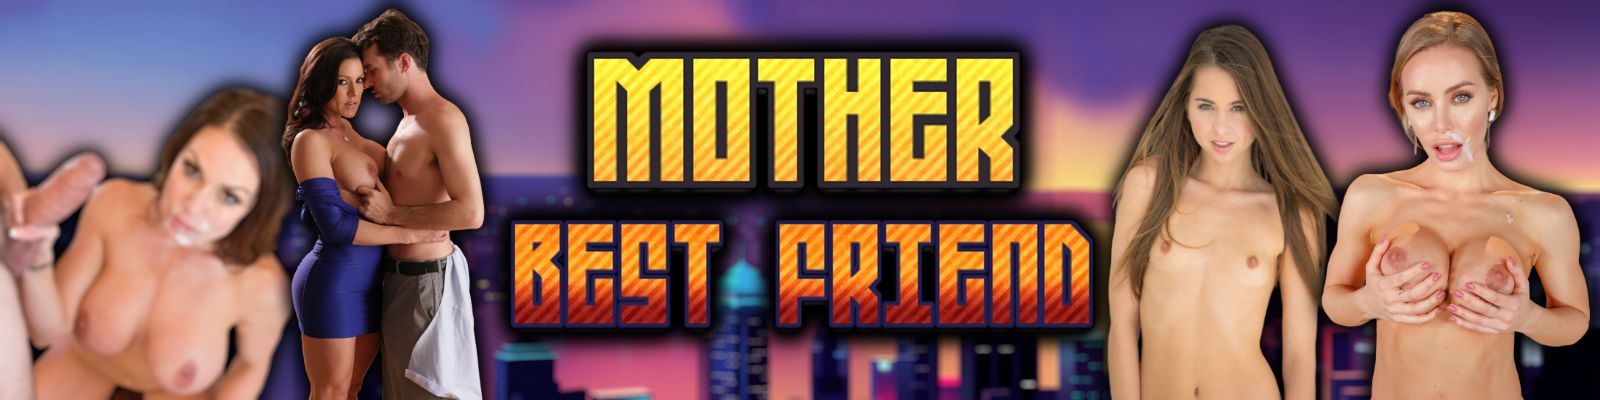 Mother's Best Friend MBF Games Adult xxx Game Download